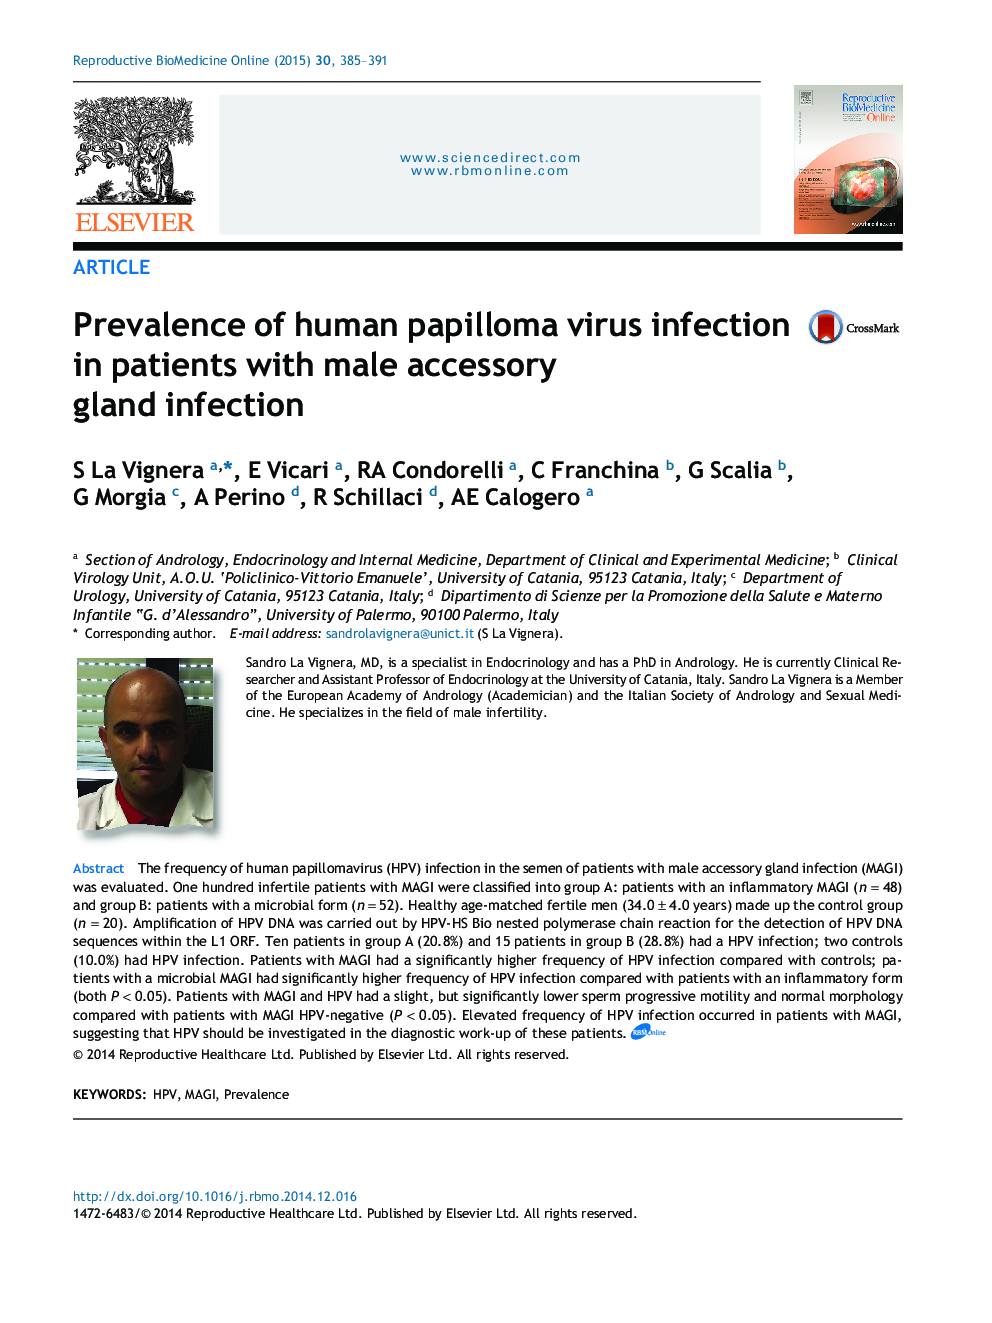 Prevalence of human papilloma virus infection in patients with male accessory gland infection